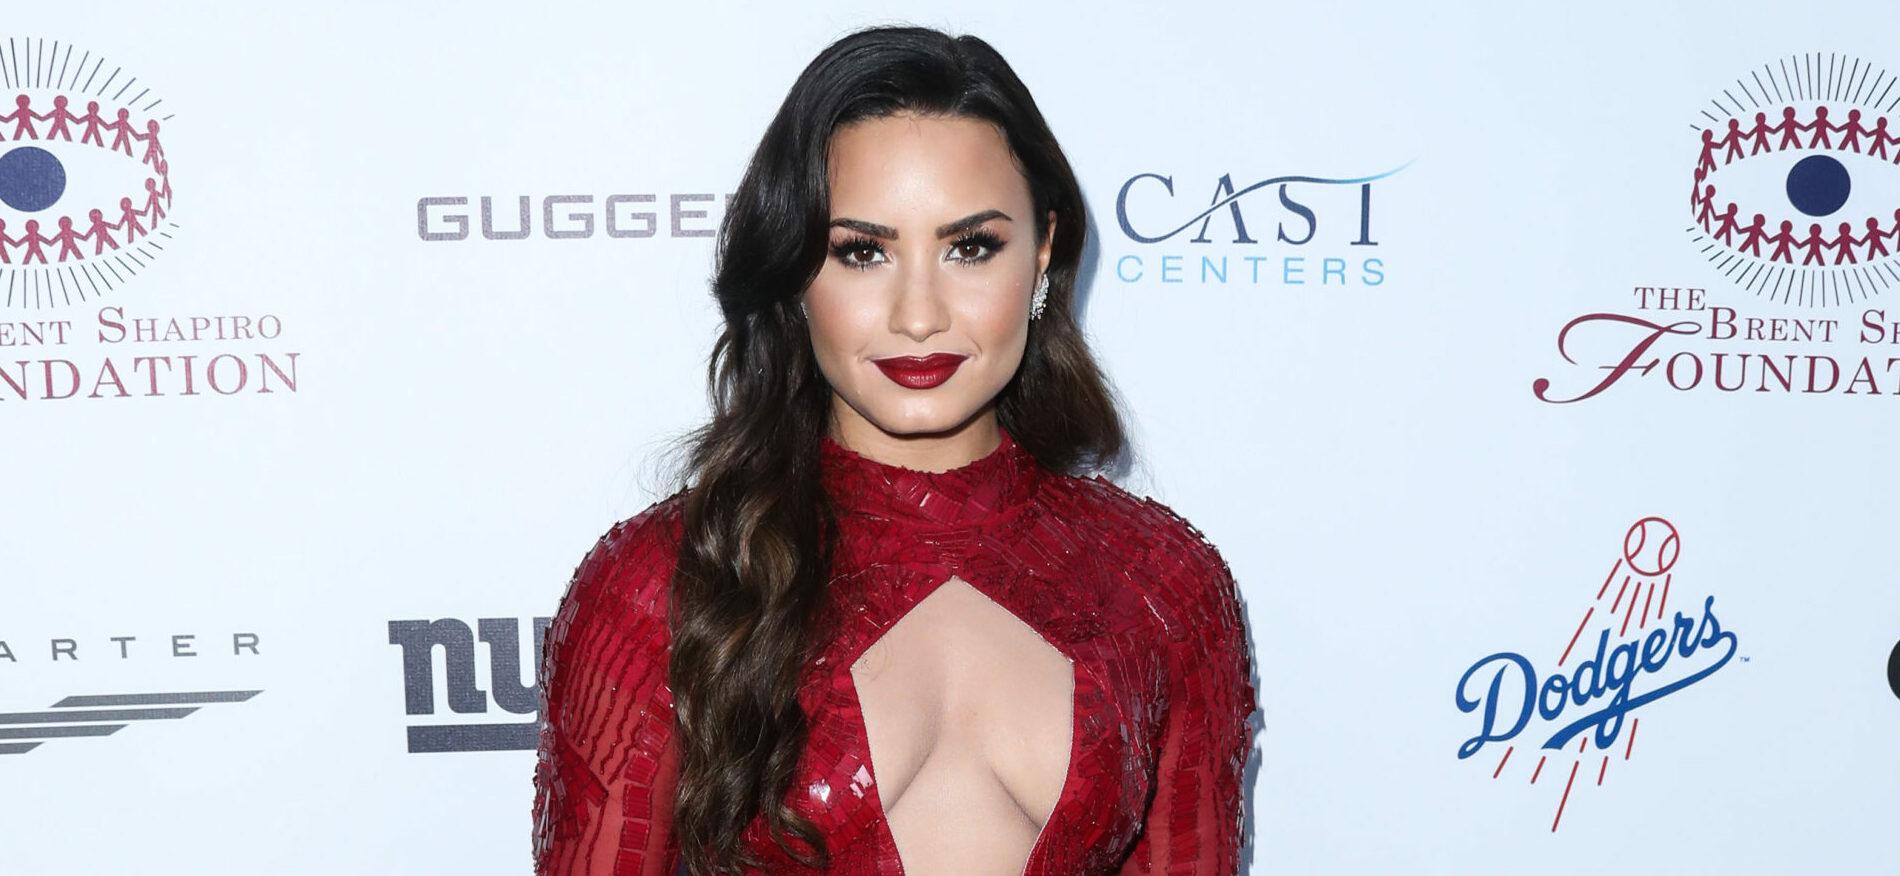 UK Bans Demi Lovato Album Posters For Being Disrespectful To Christians